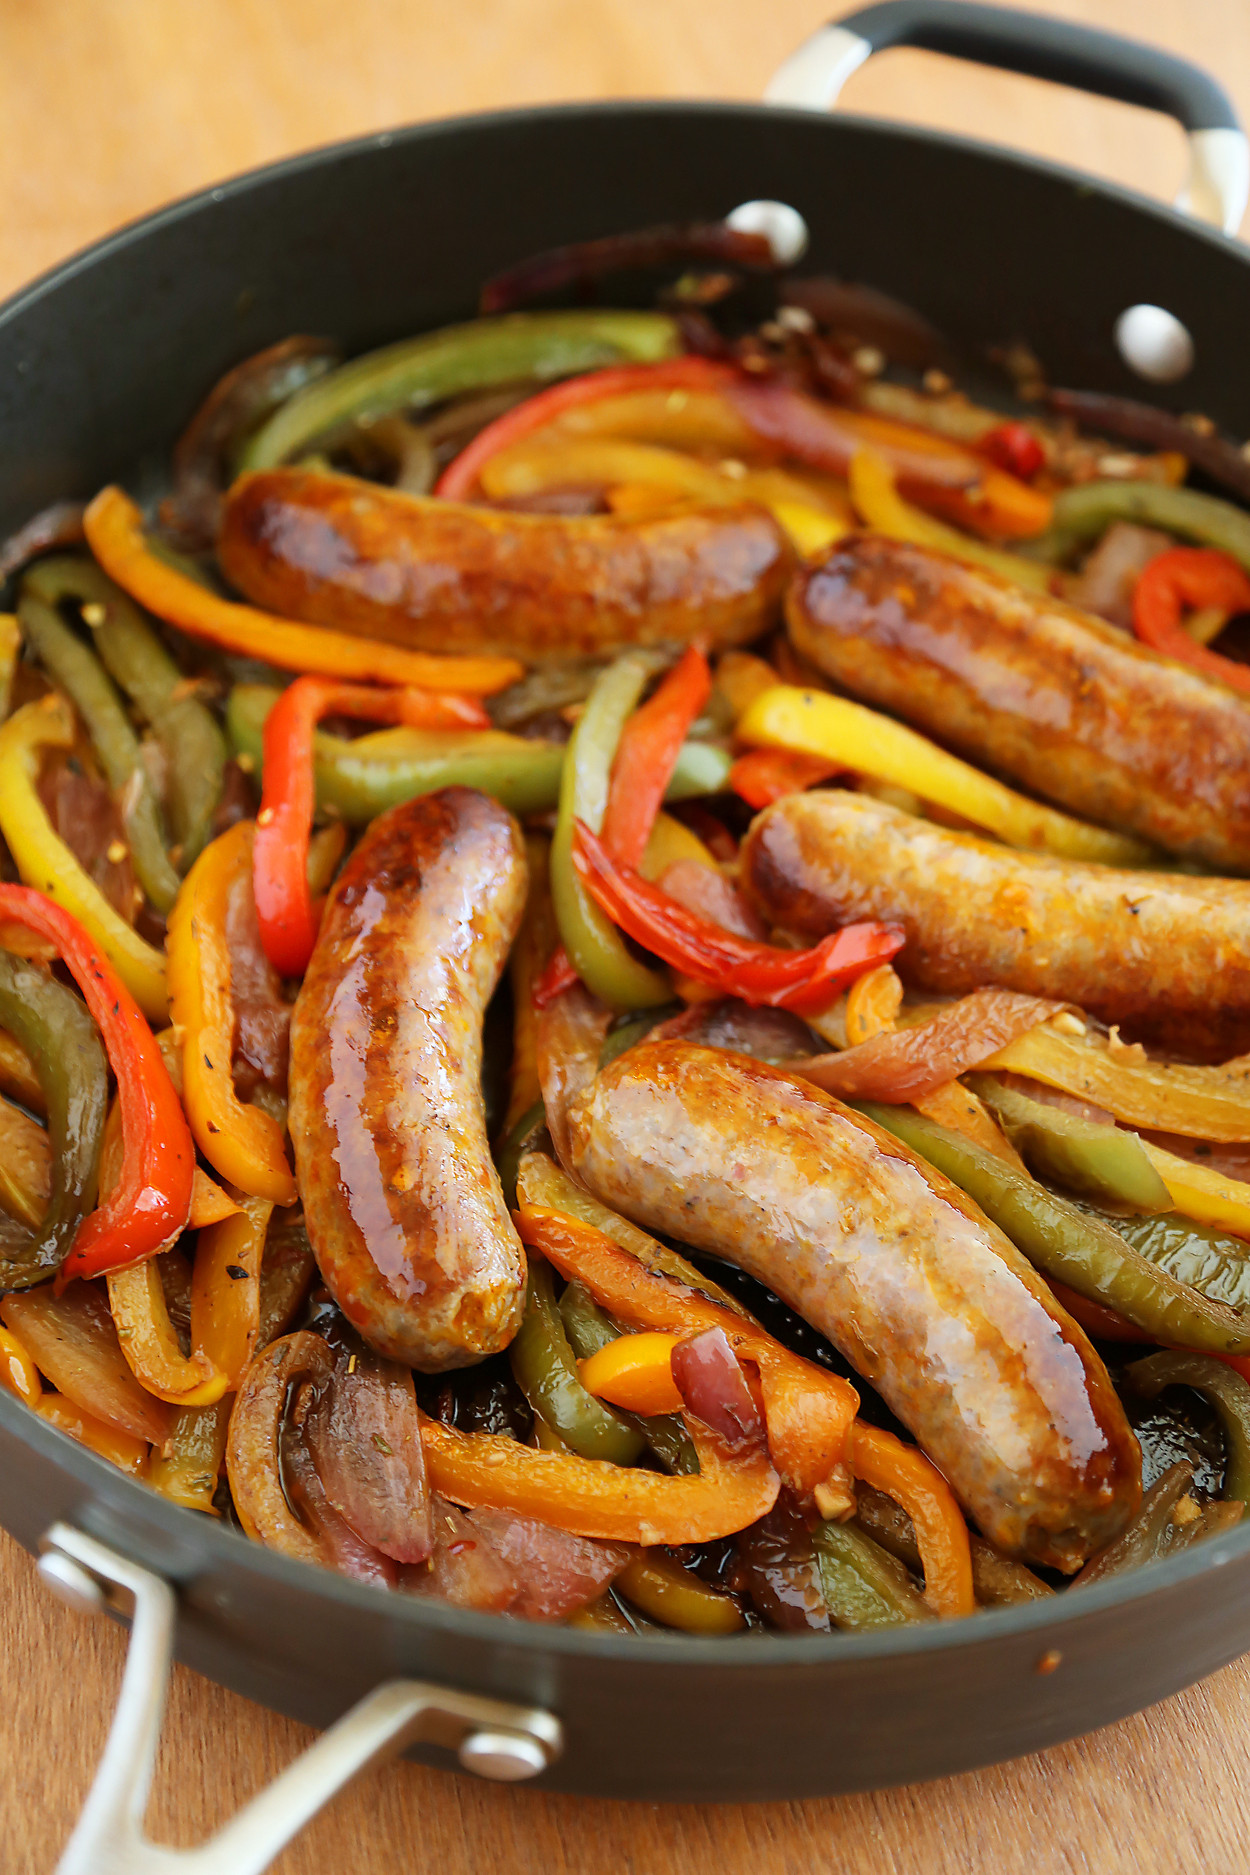 Recipes For Italian Sausage
 Skillet Italian Sausage Peppers and ions – The fort